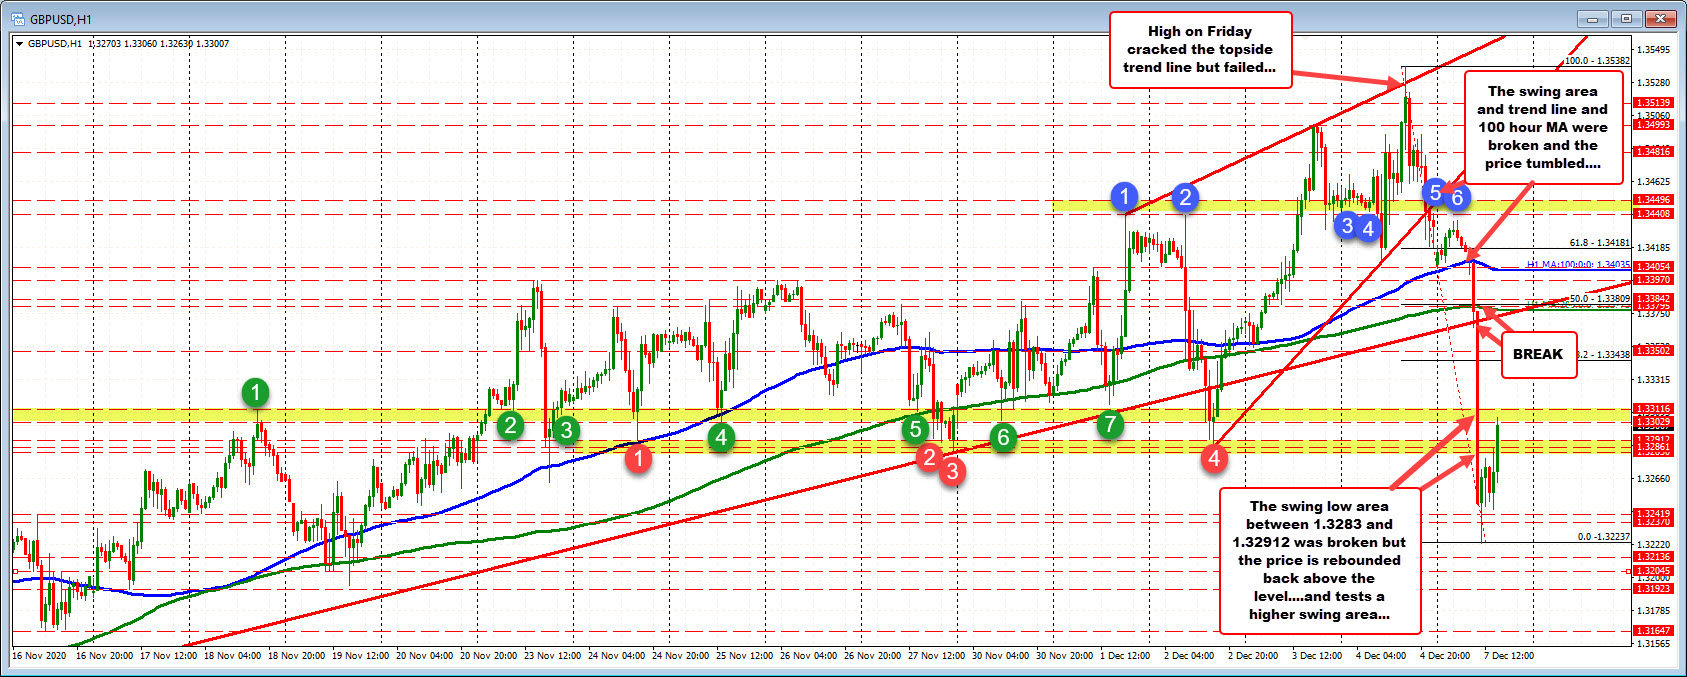 Low swing areas in play in the GBPUSD after plunge